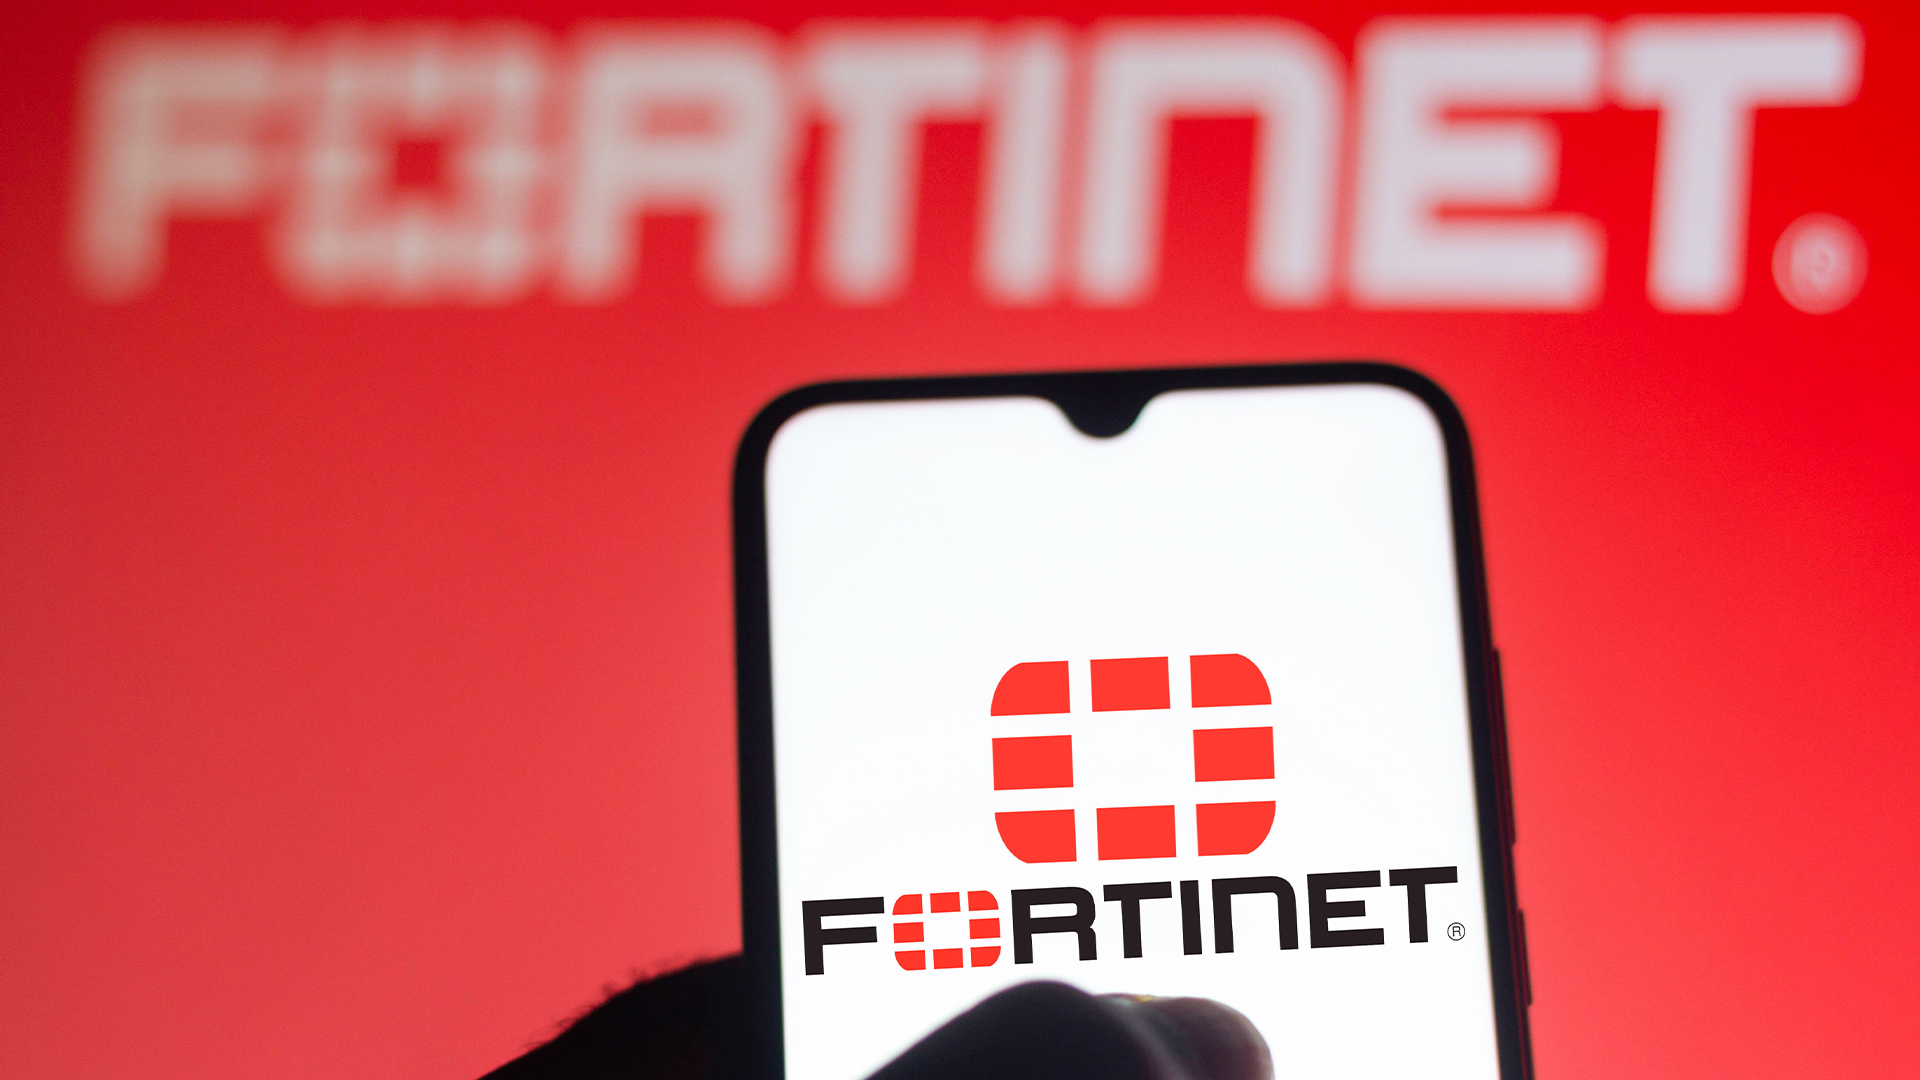 More than 133,000 Fortinet devices remain vulnerable to a critical flaw - here's why you need to patch now